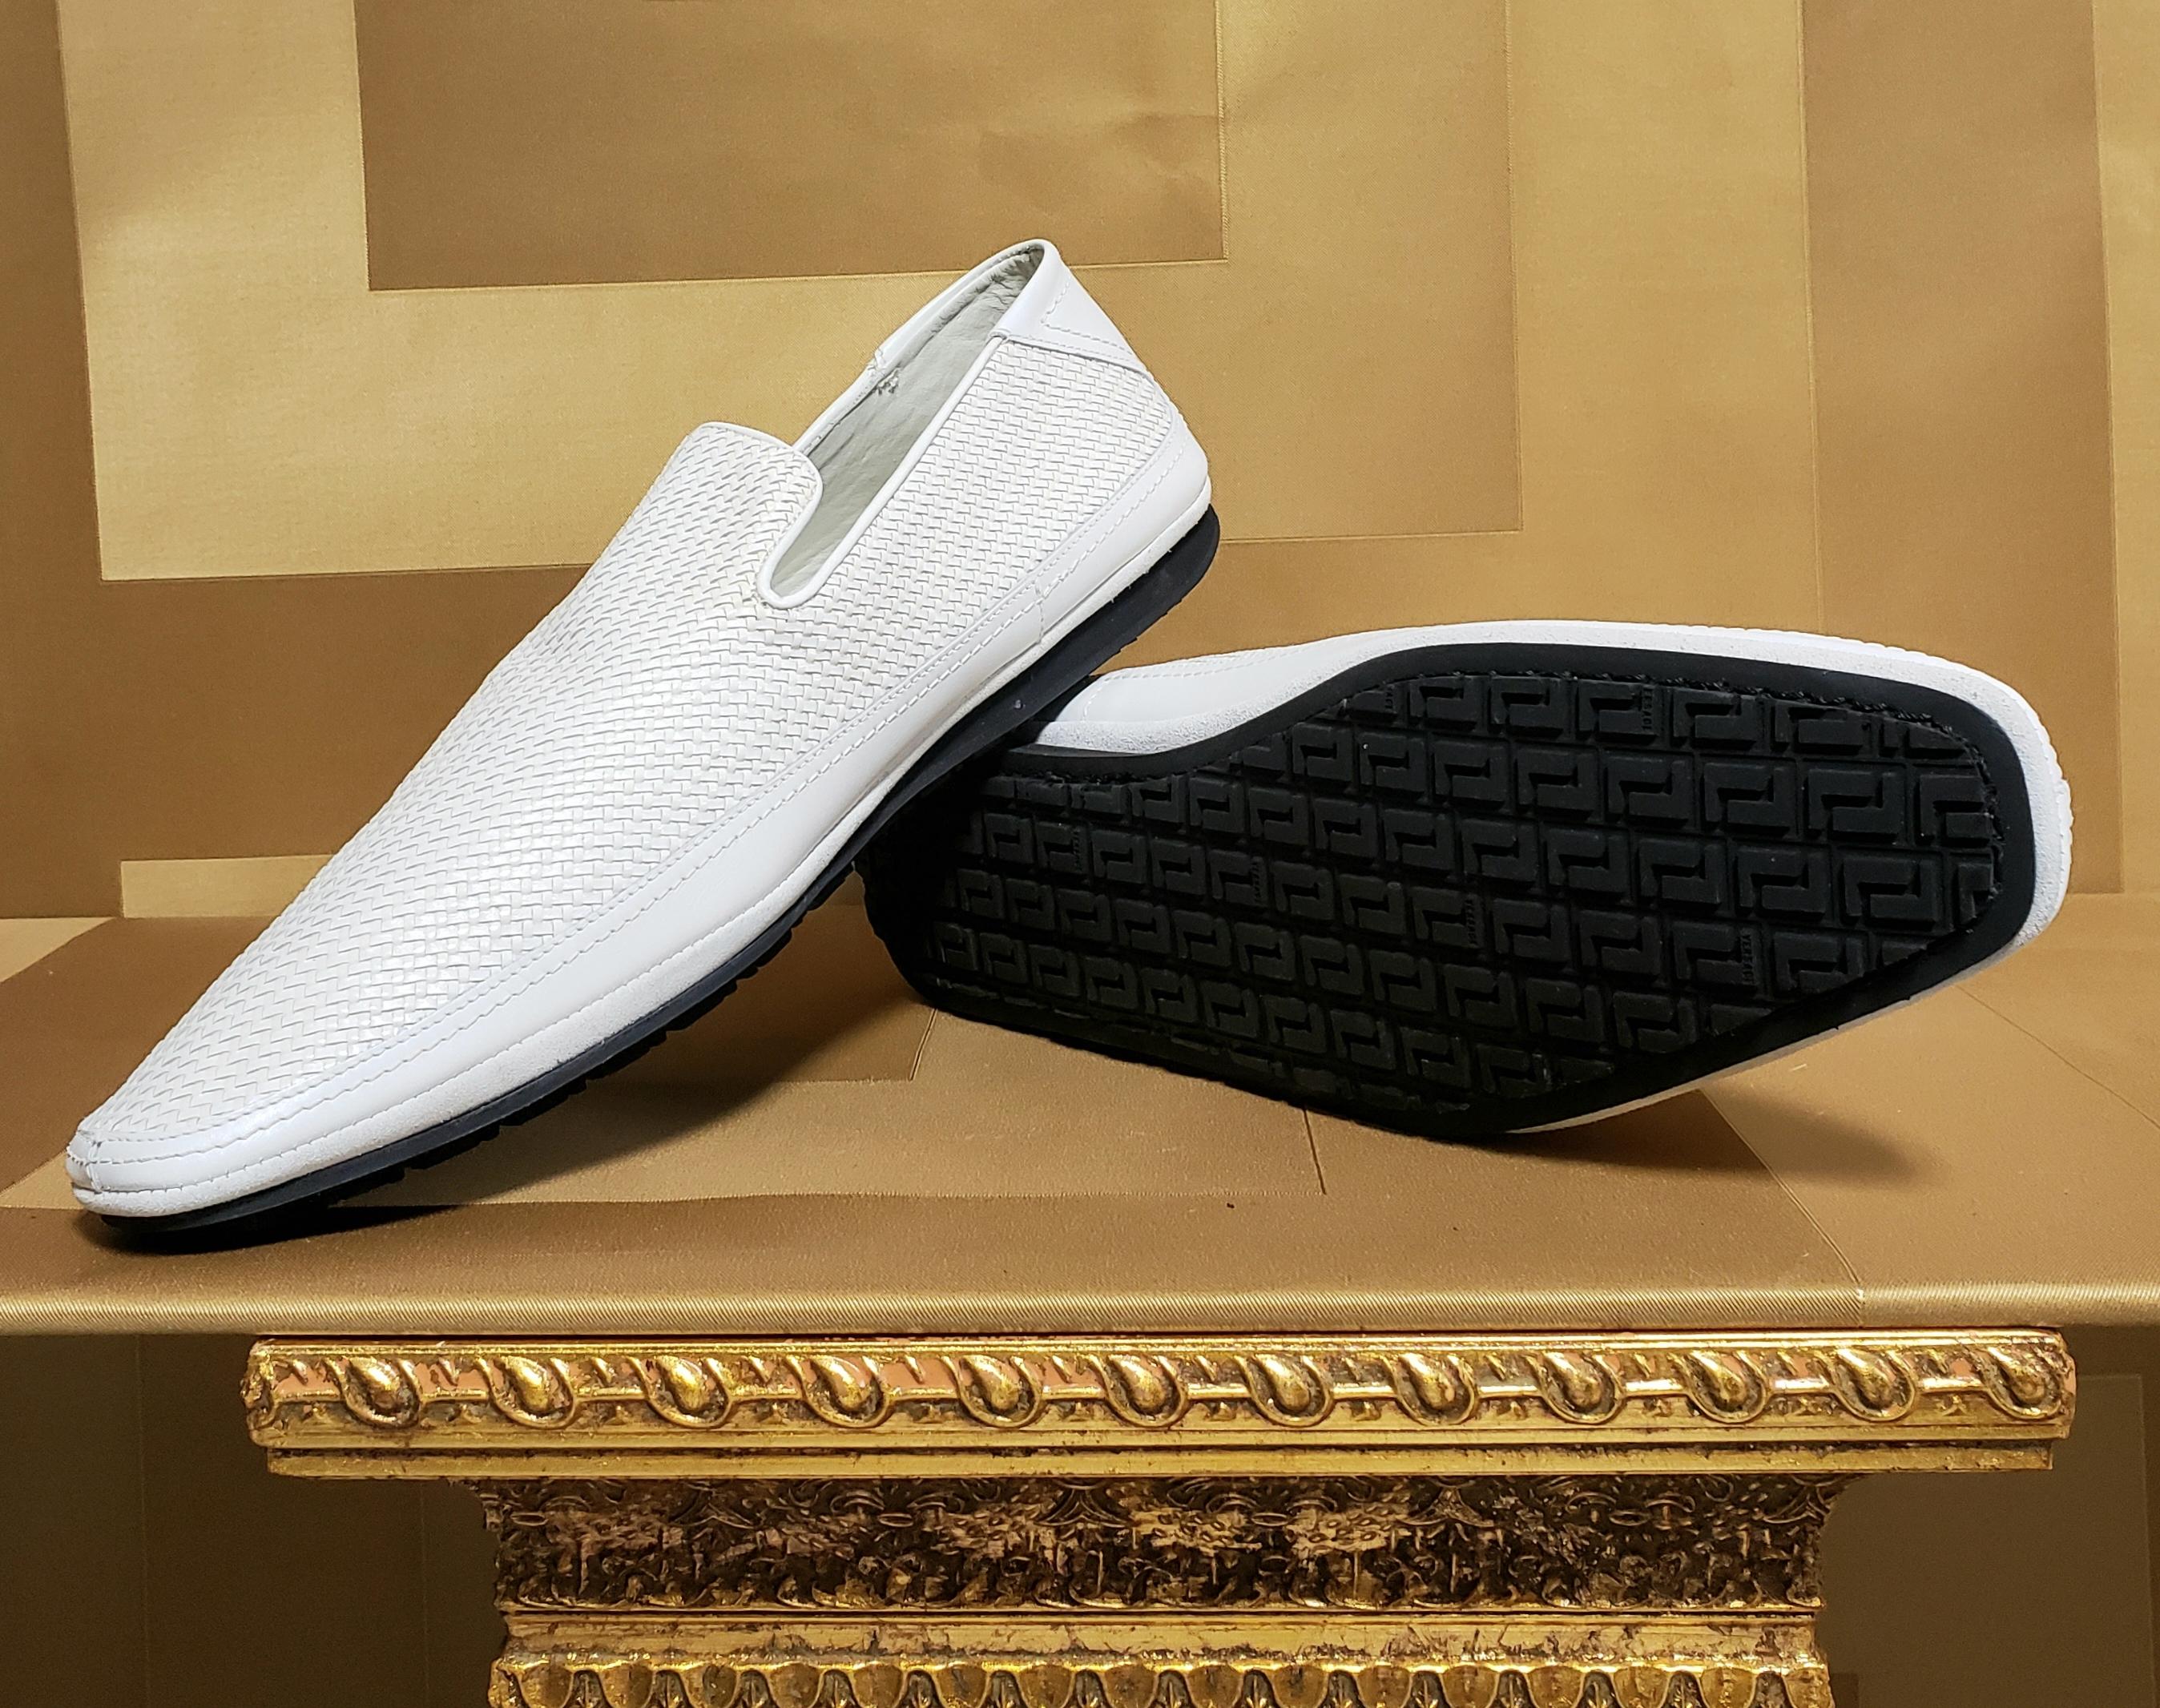 VERSACE 

Chic and casual never looked so good, so slip into these Versace loafers and find out what the fuss is all about.

Non-slip rubber sole

Color: White
Content: 100% Leather

Leather lining

Leather Sole with rubber finish

Made in